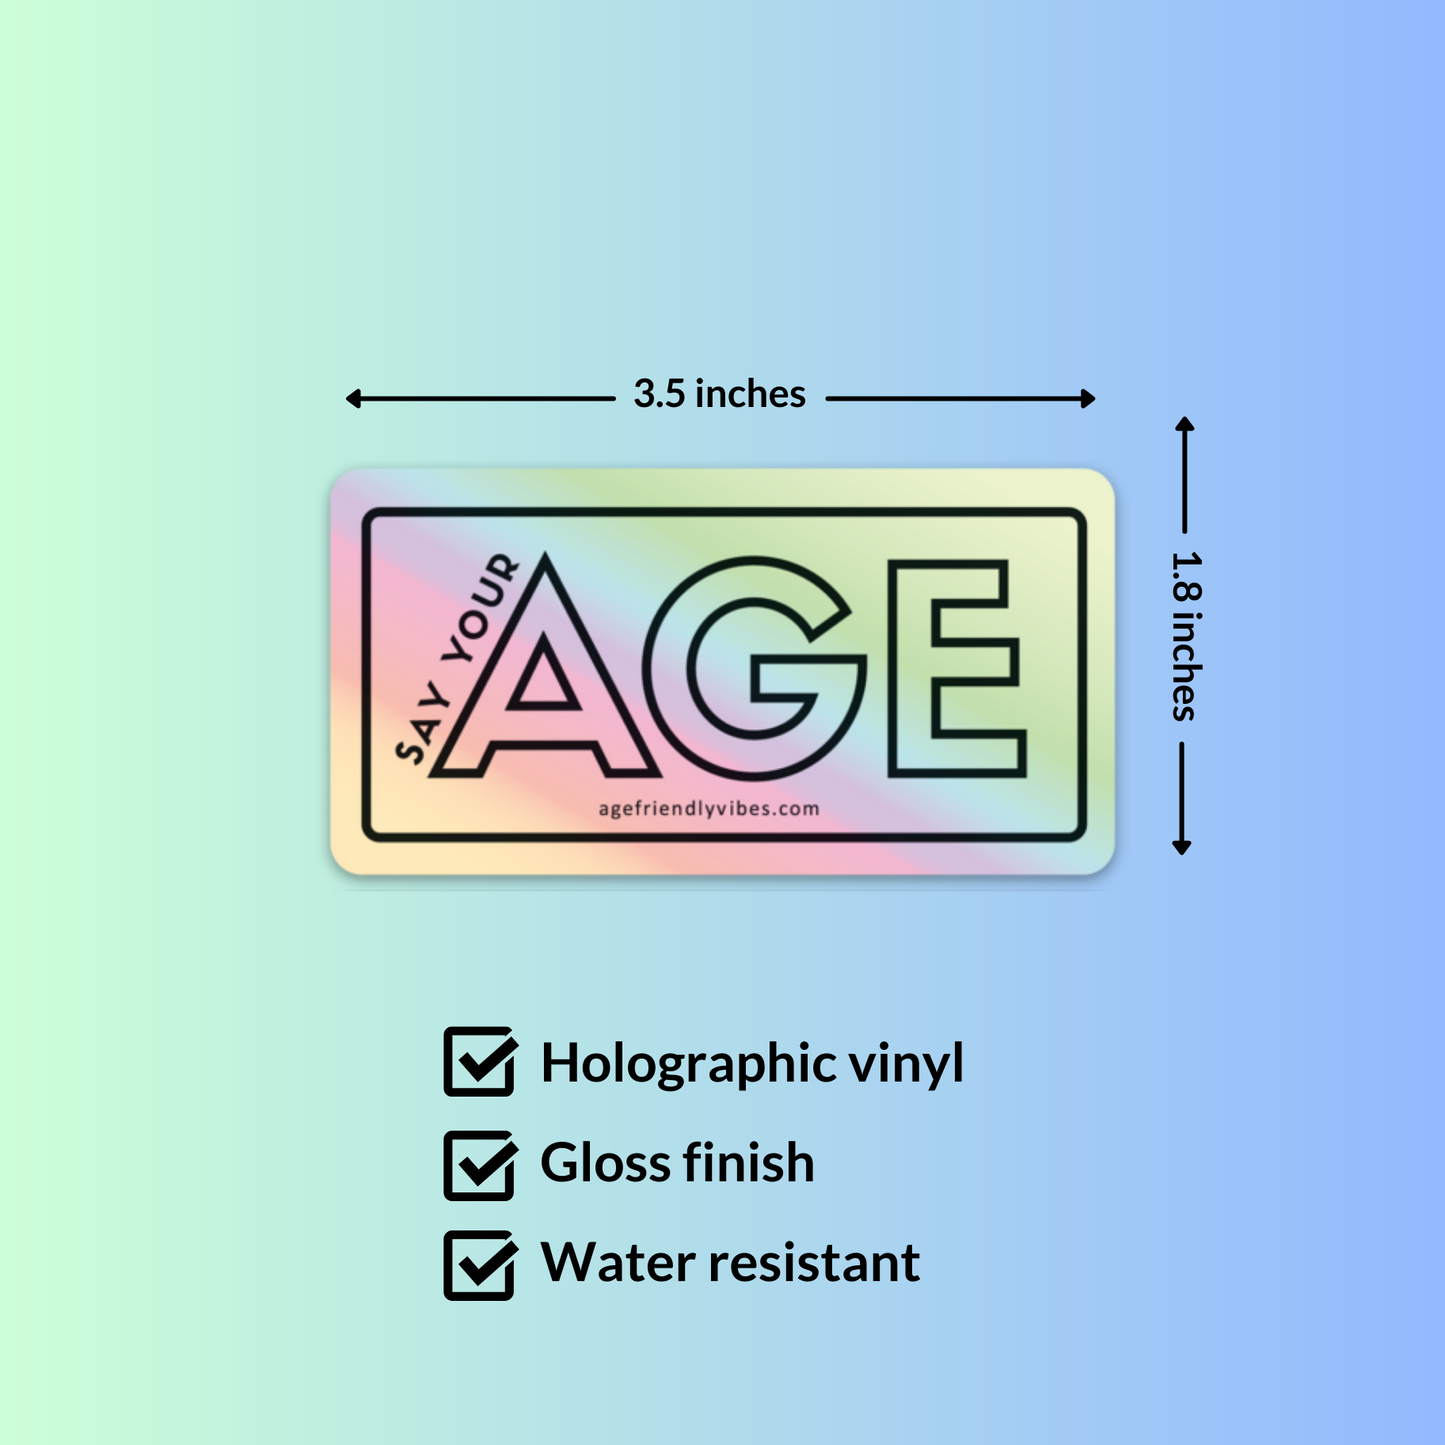 Say Your Age Holographic Sticker